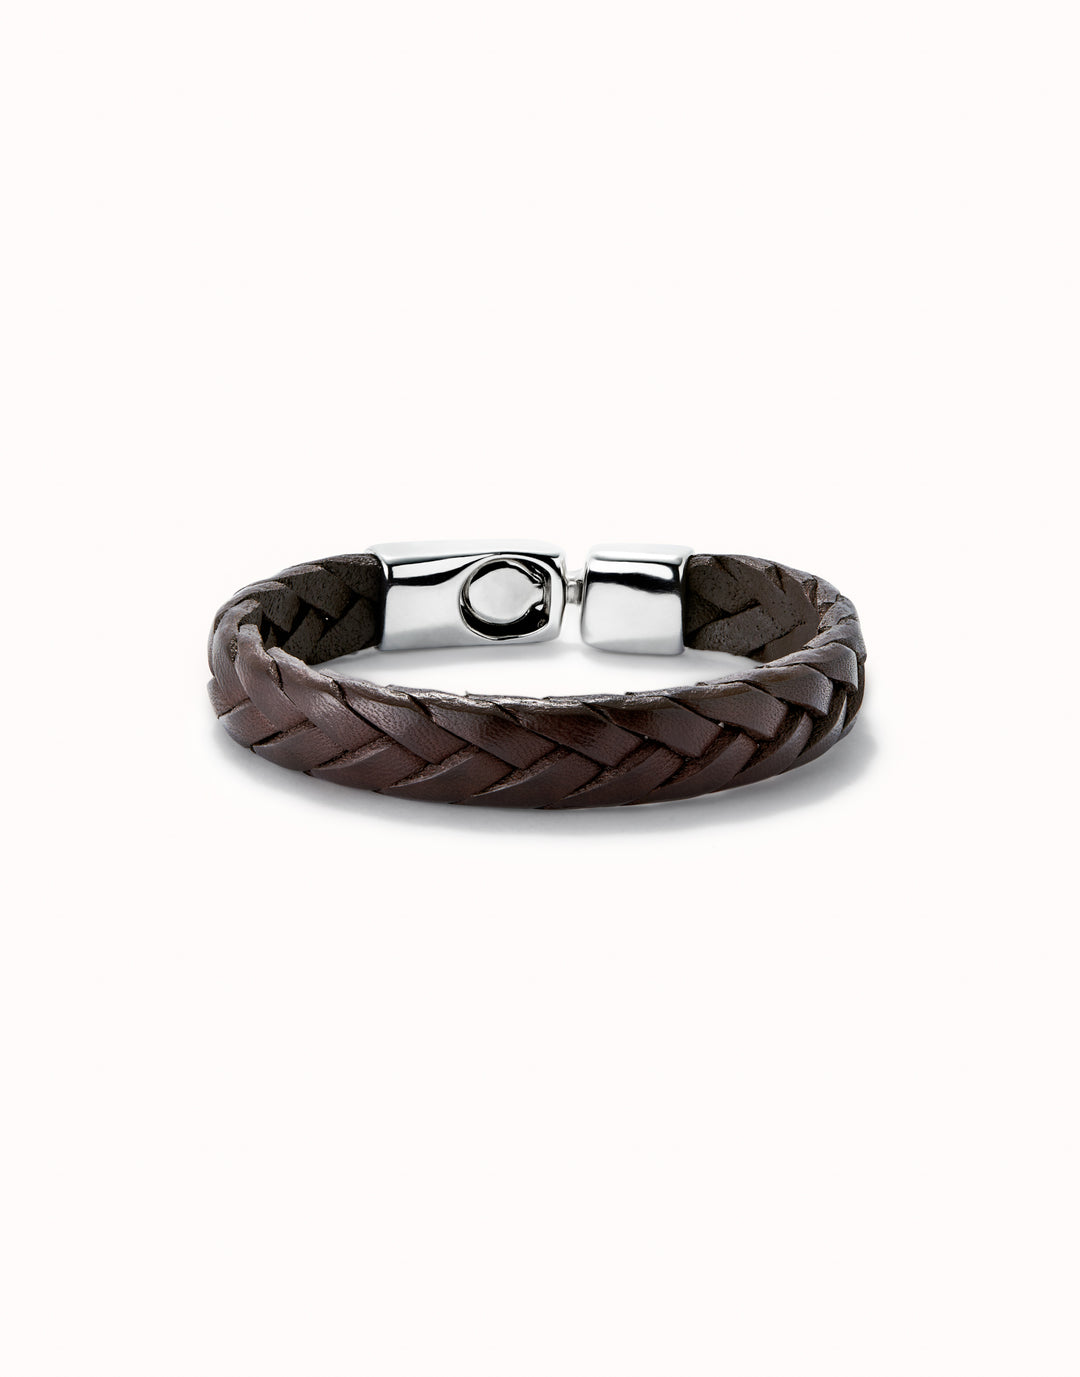 LEATHER WOVEN BROWN BRACELET-SILVER